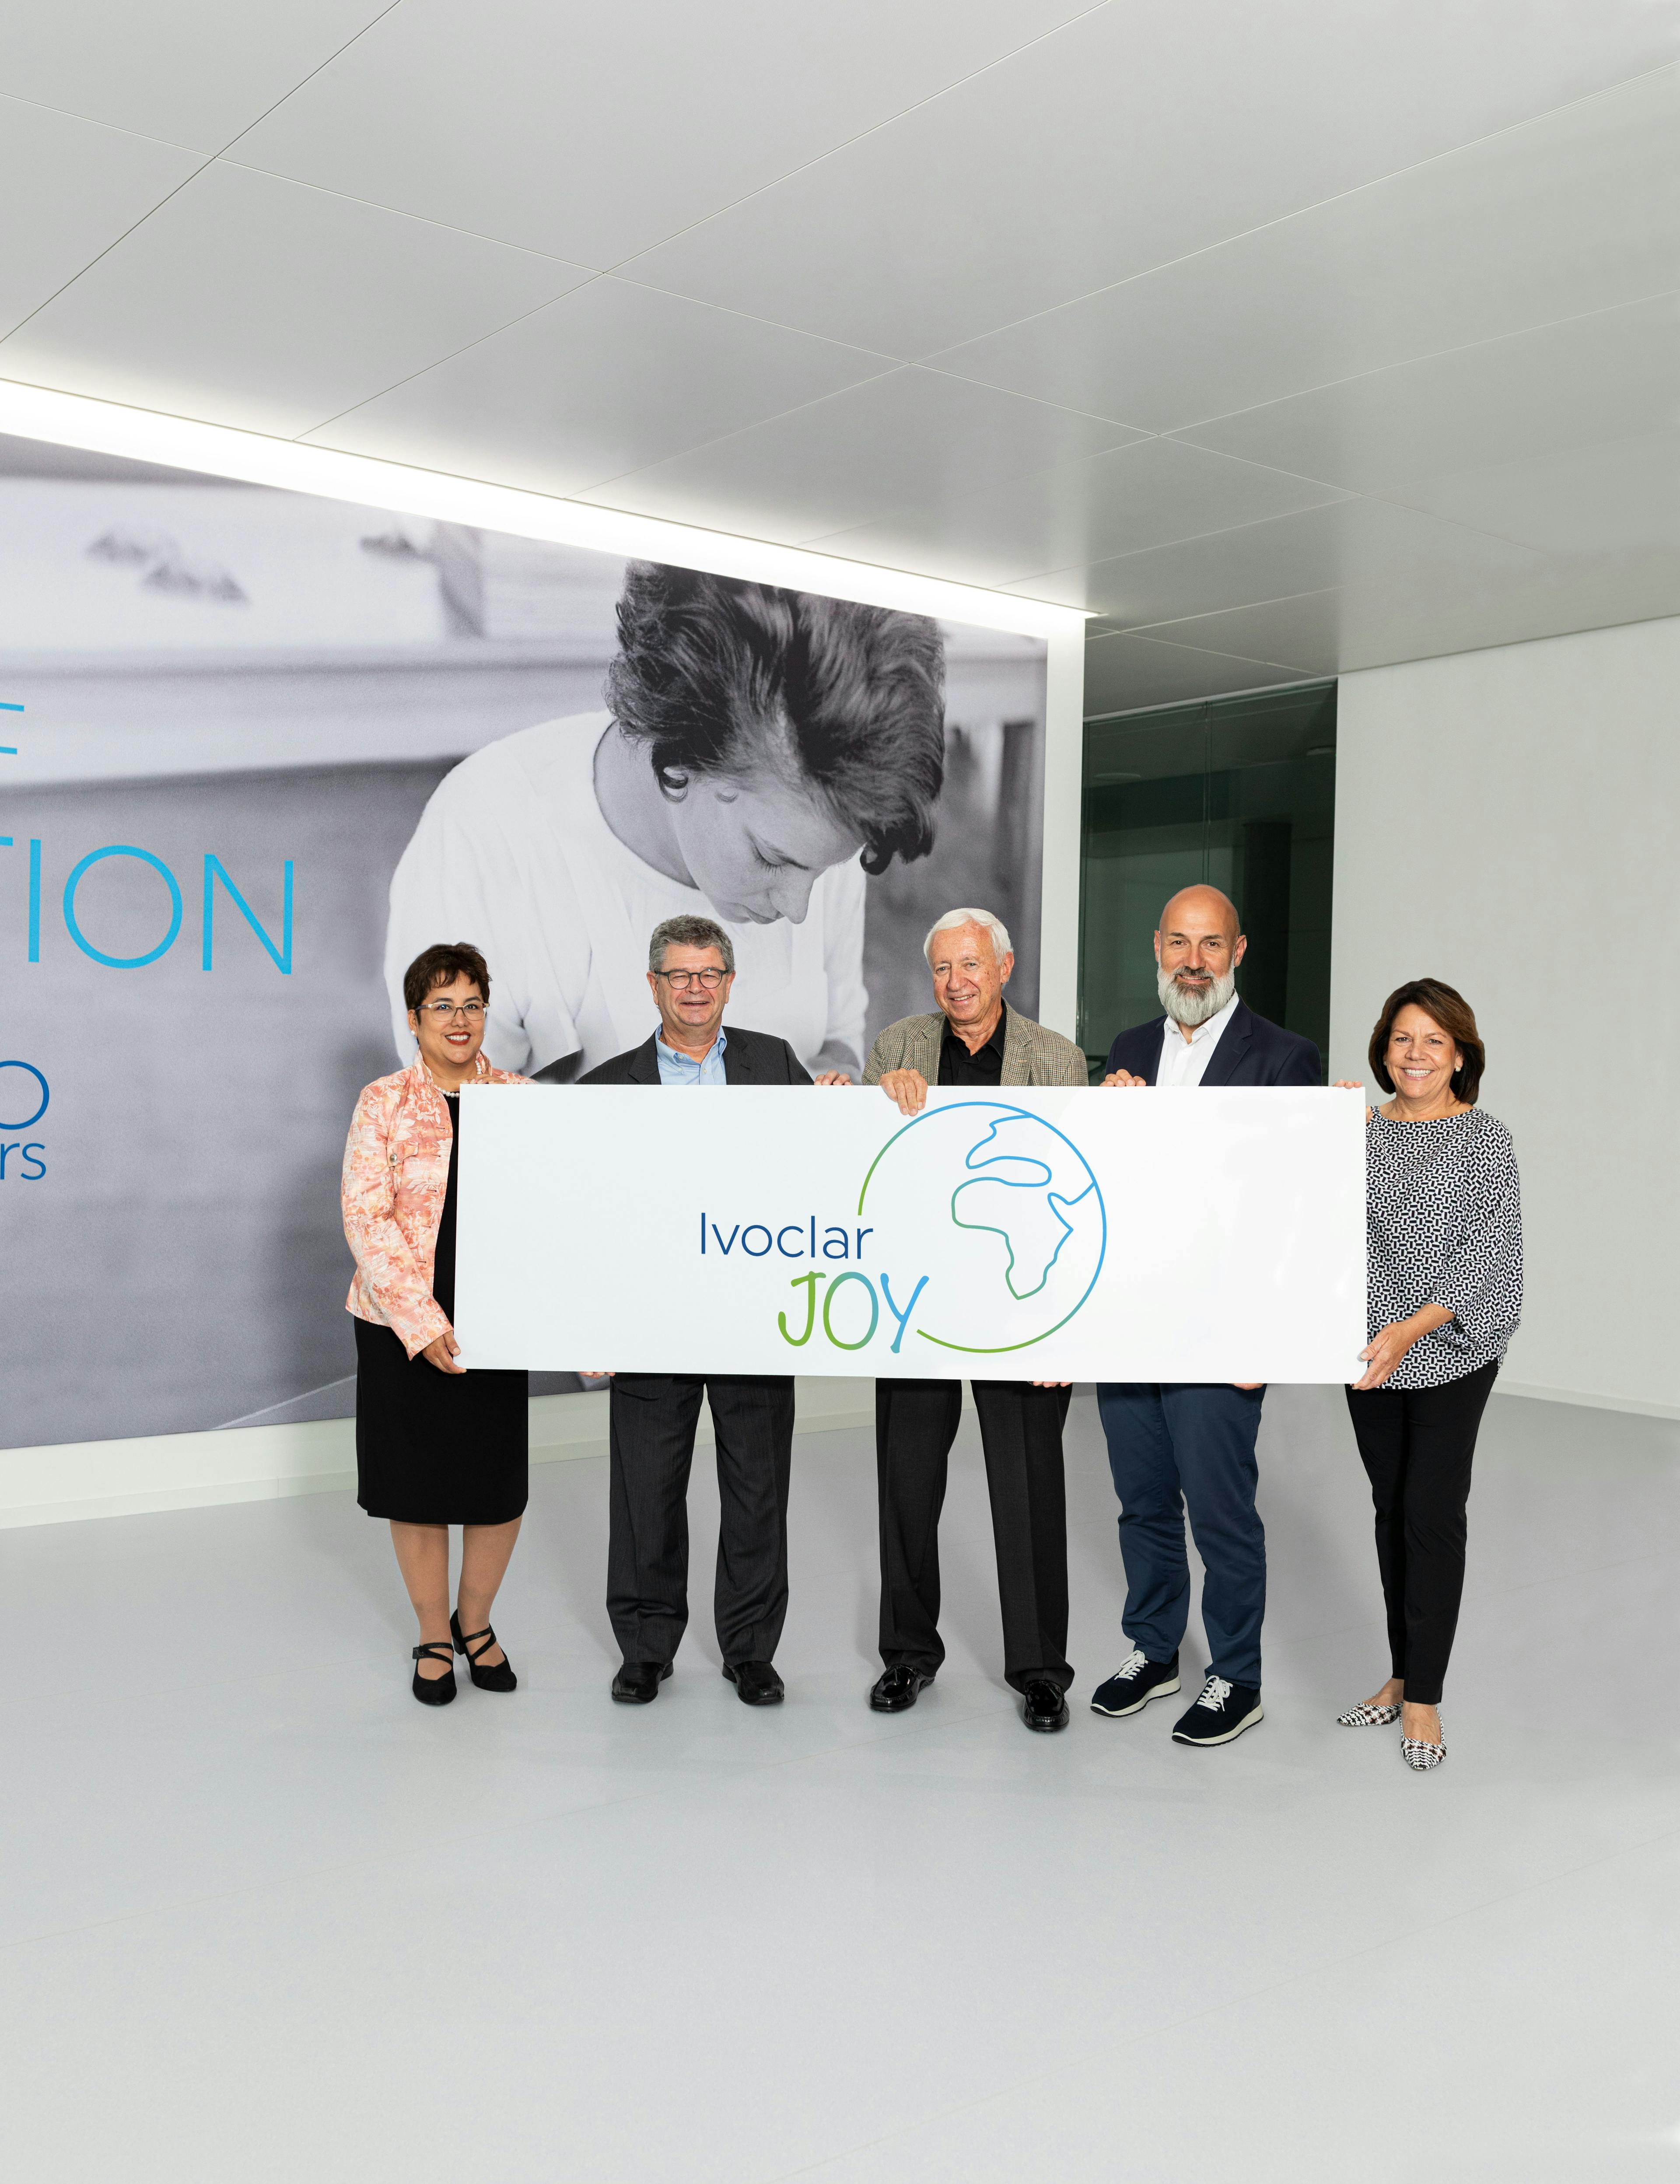 Ivoclar Group Launches Global Aid Program "Ivoclar Joy" to Bring Smiles Through Dental Care. Image credit: © Ivoclar